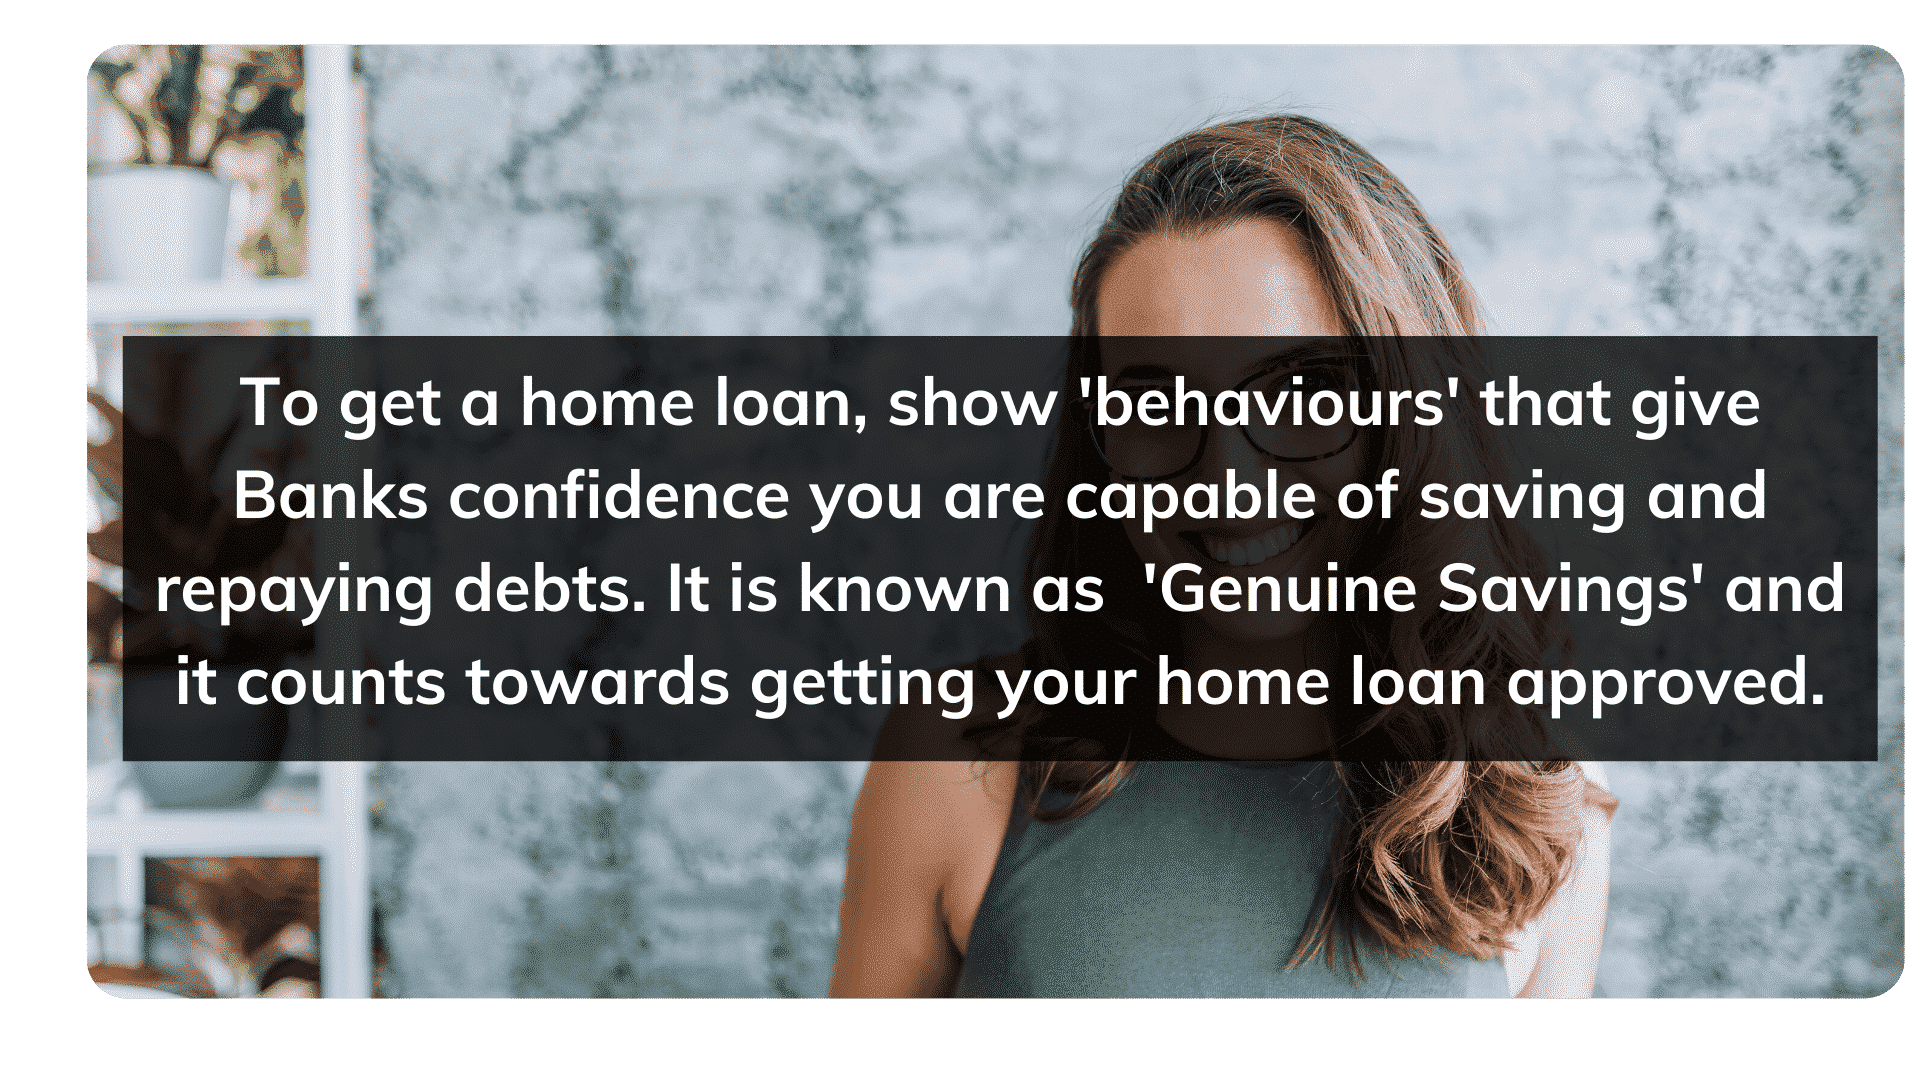 To get a home loan, show 'behaviours' that give banks confidence